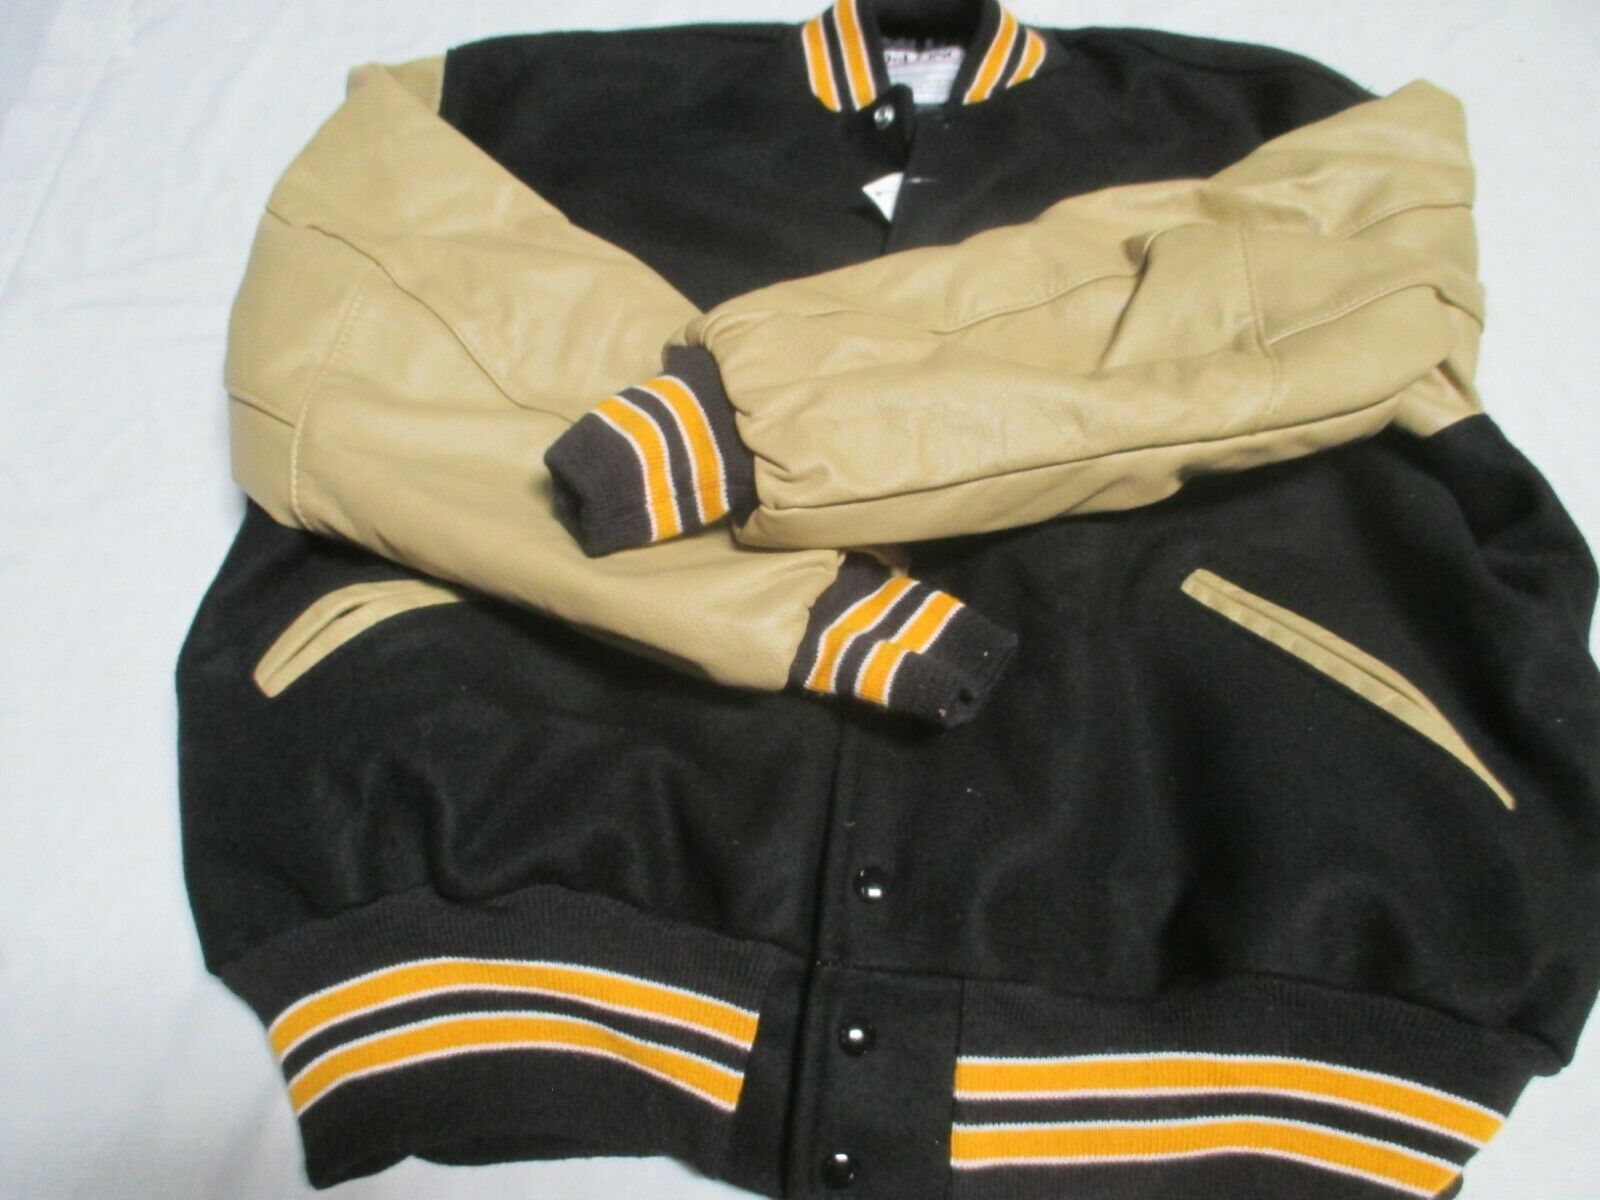 CENTRALIA ADULT BLK W CREAM SLEEVES 2 GLD STRIPES OUTLINE IN WHT NYL LINE JACKET